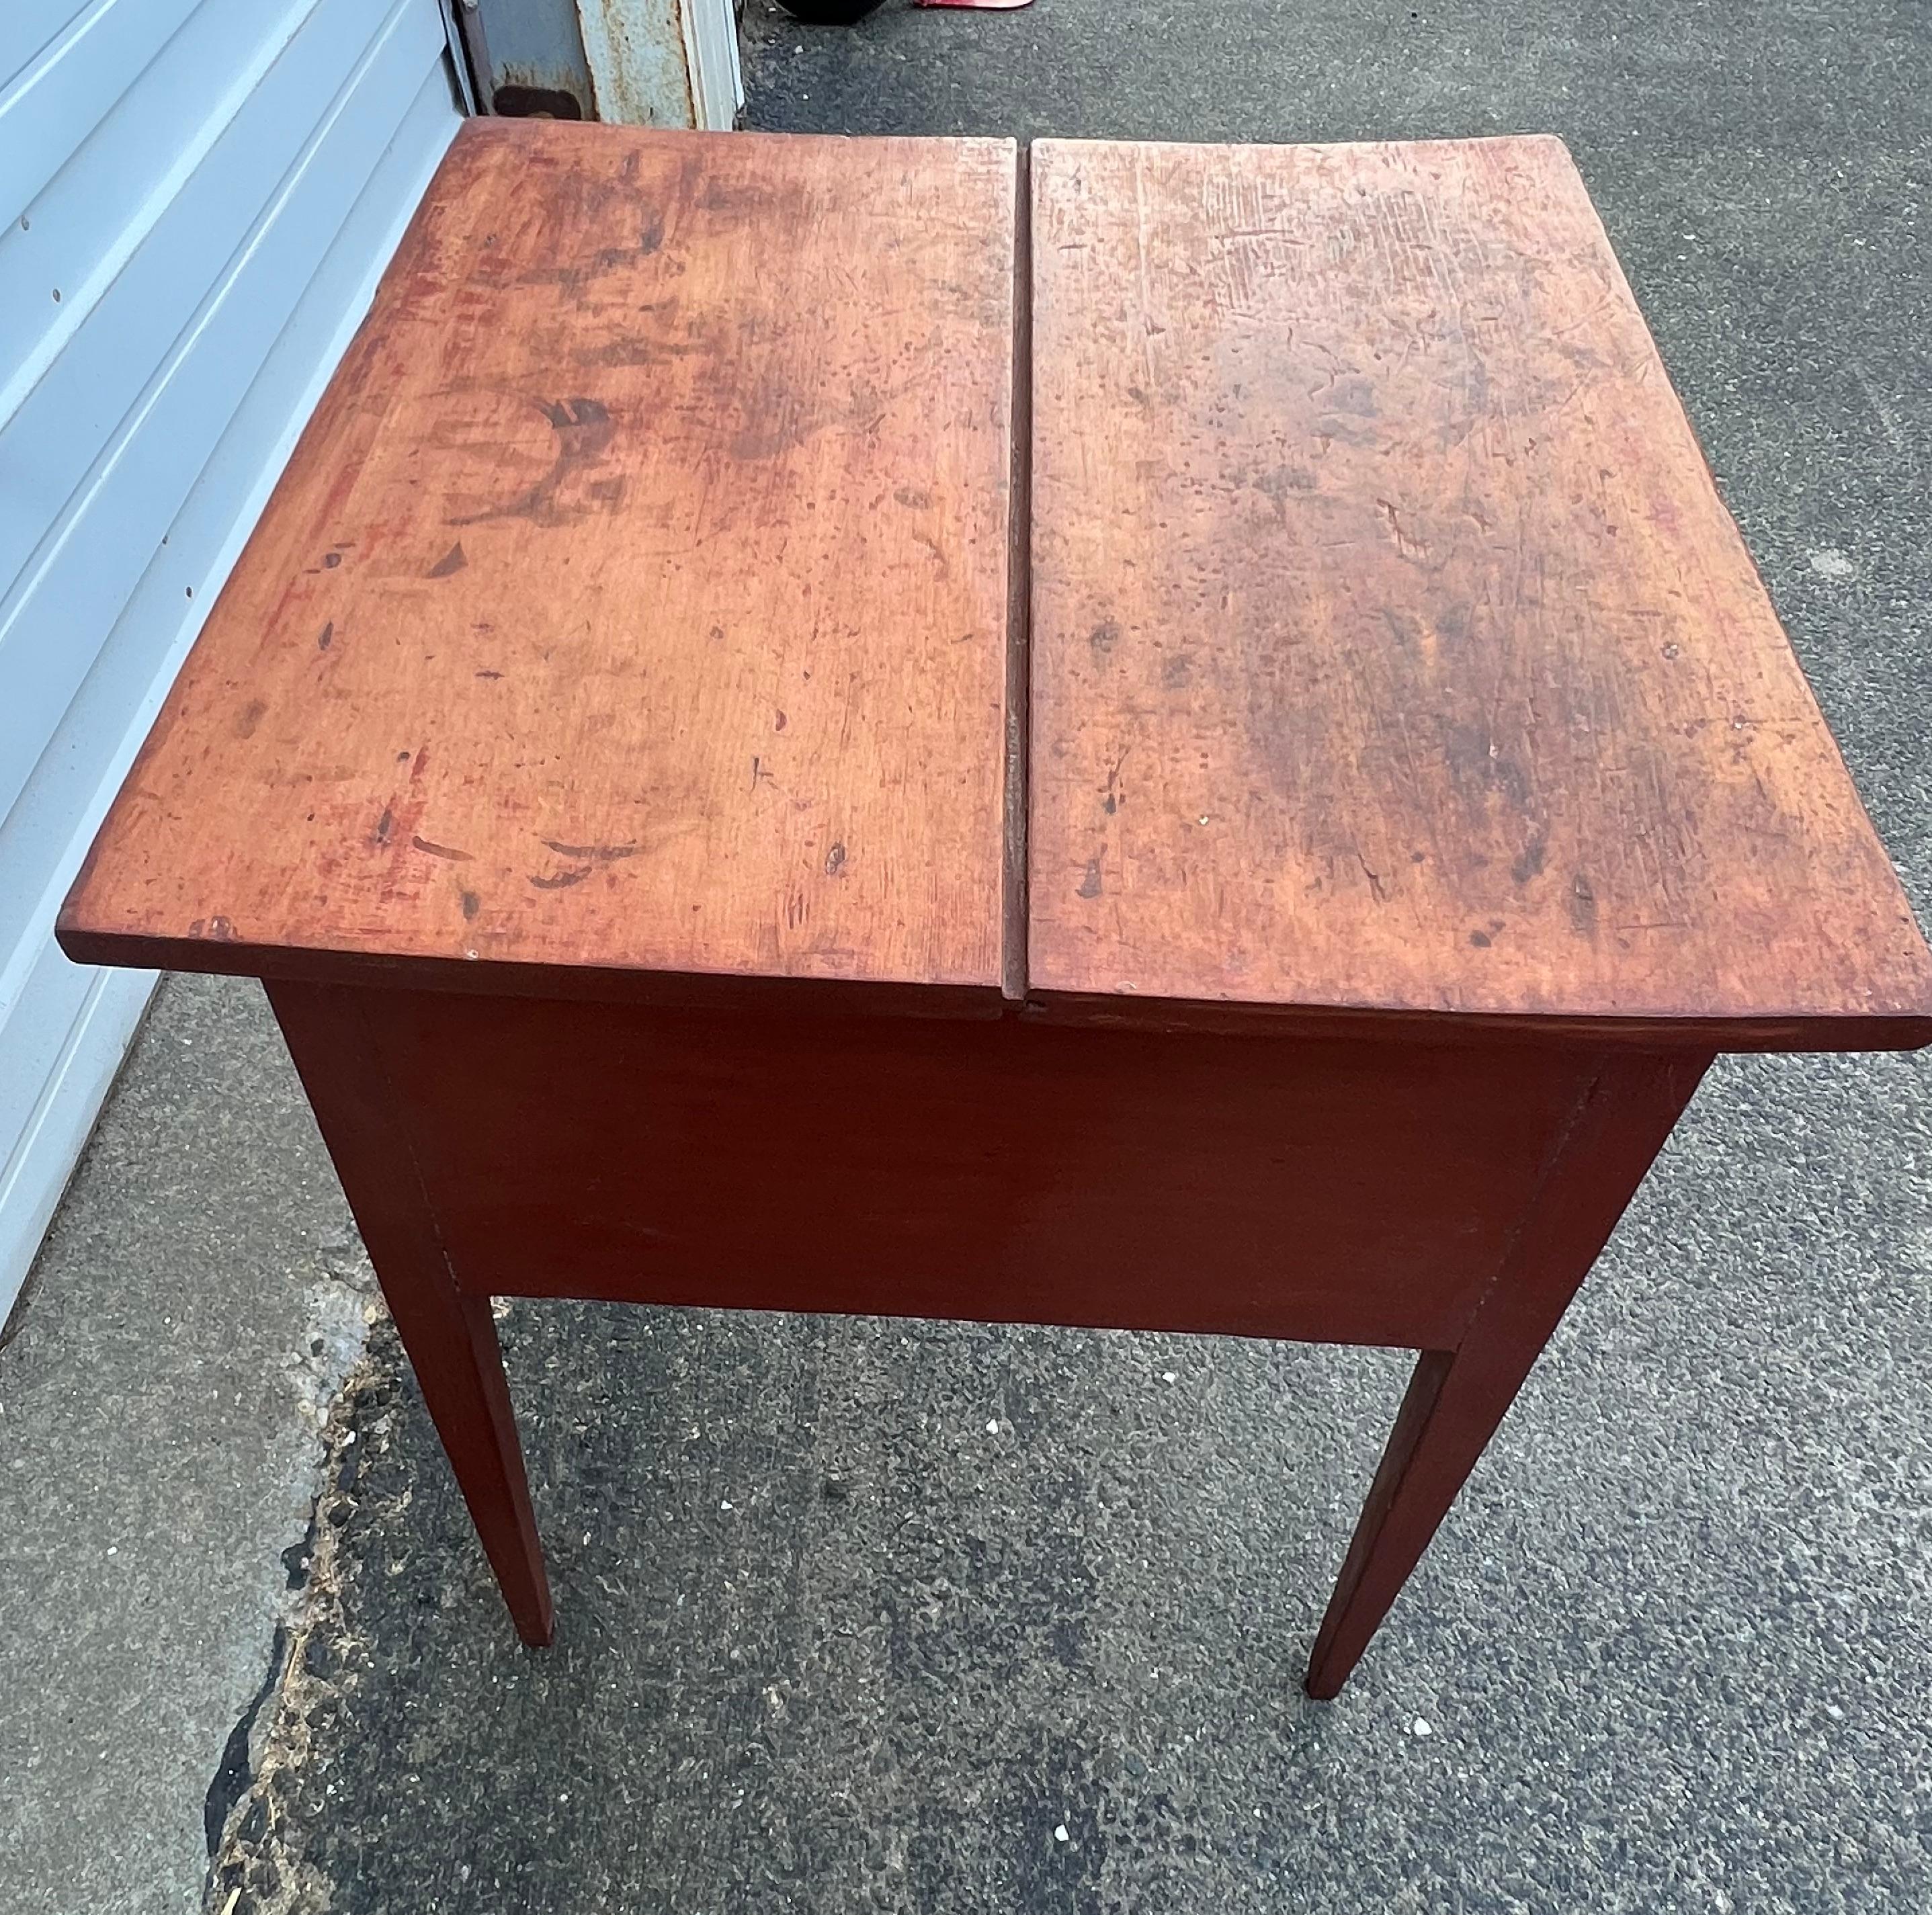 19th Century Two Drawer Side Table in Original Red Paint In Good Condition For Sale In Nantucket, MA